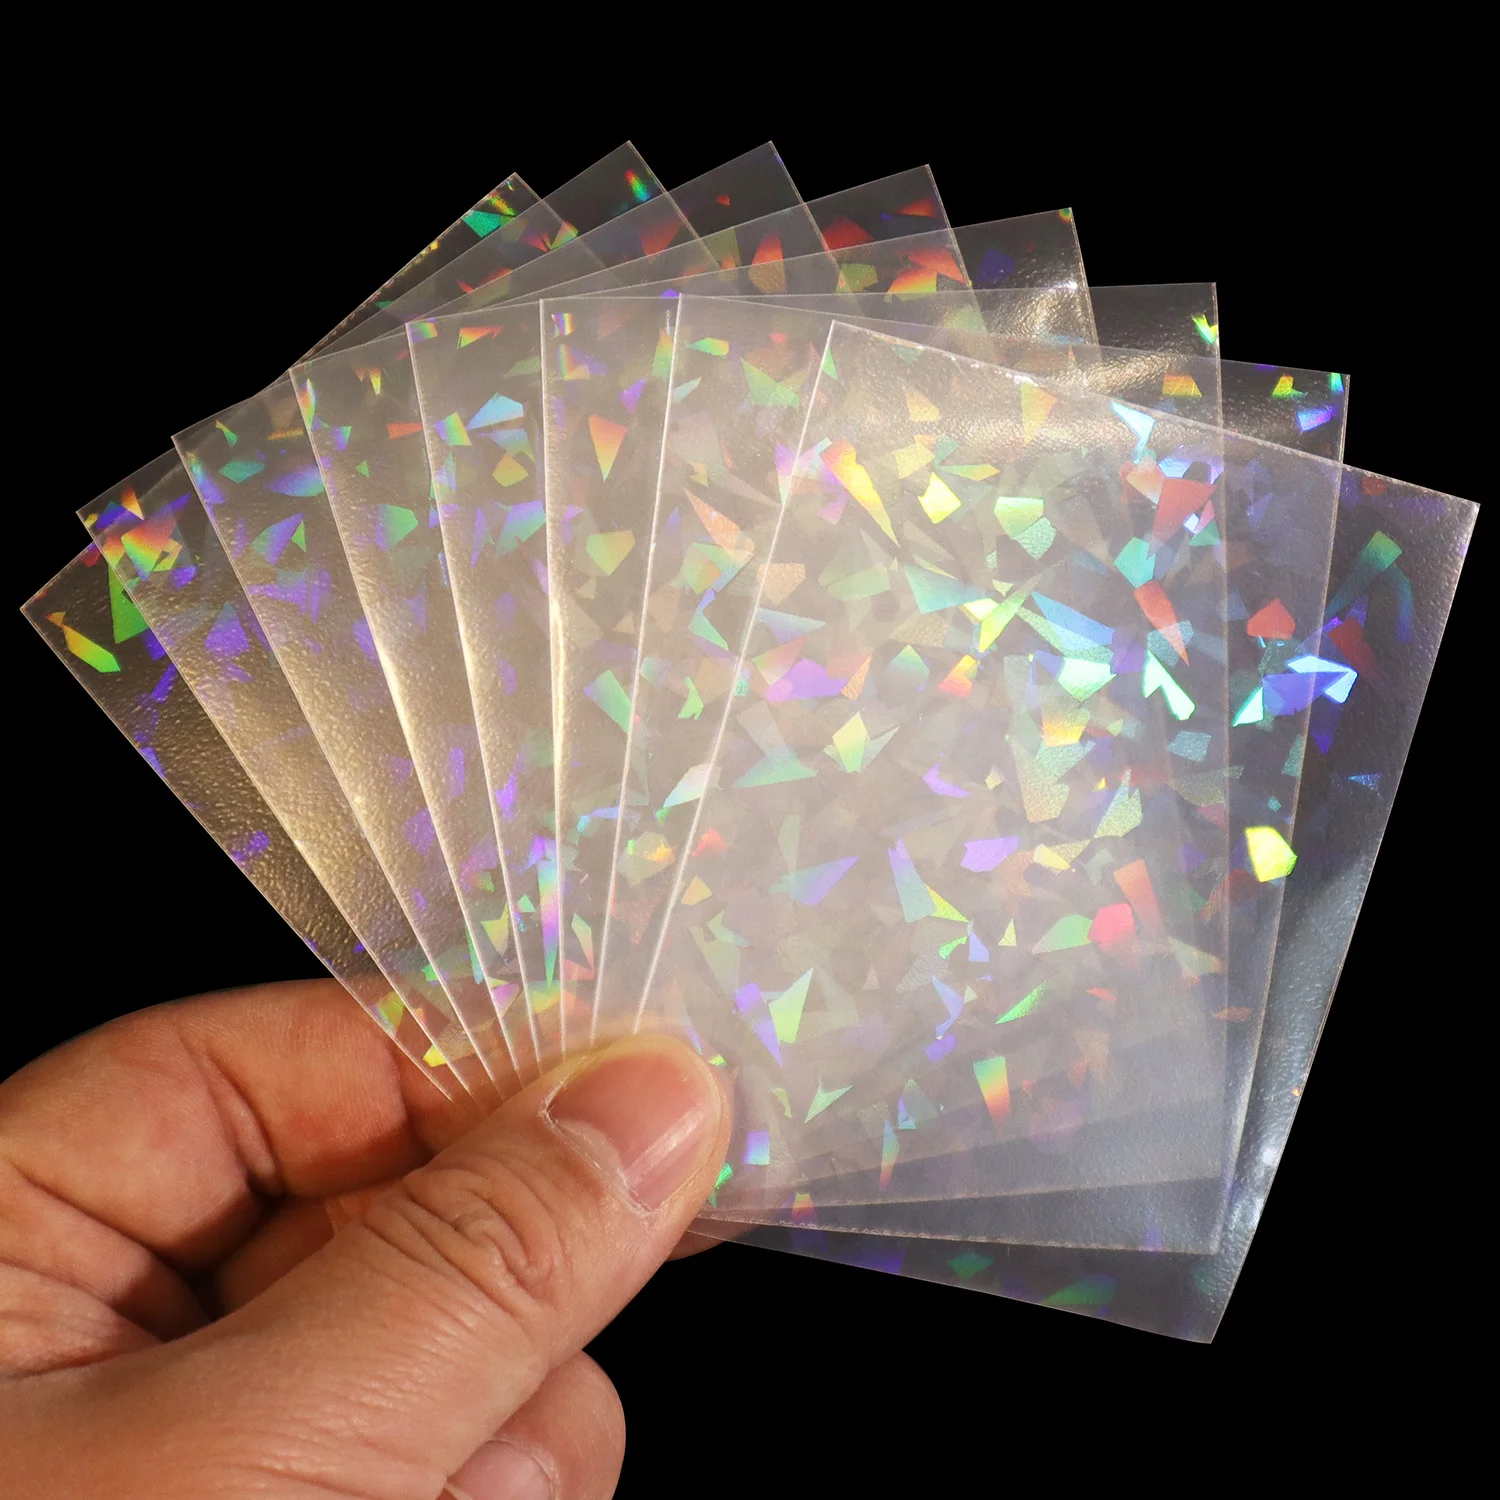 100 PCS/LOT Broken Gemstone Glass Laser High End Cards Sleeves Cards Protector Shield Magic Card Cover Pkm/MGT Desk Sleeve66x91 100 pcs lot various broken gemstone glass laser high end cards sleeves 66x91 idol photo holographic protector card shield cover